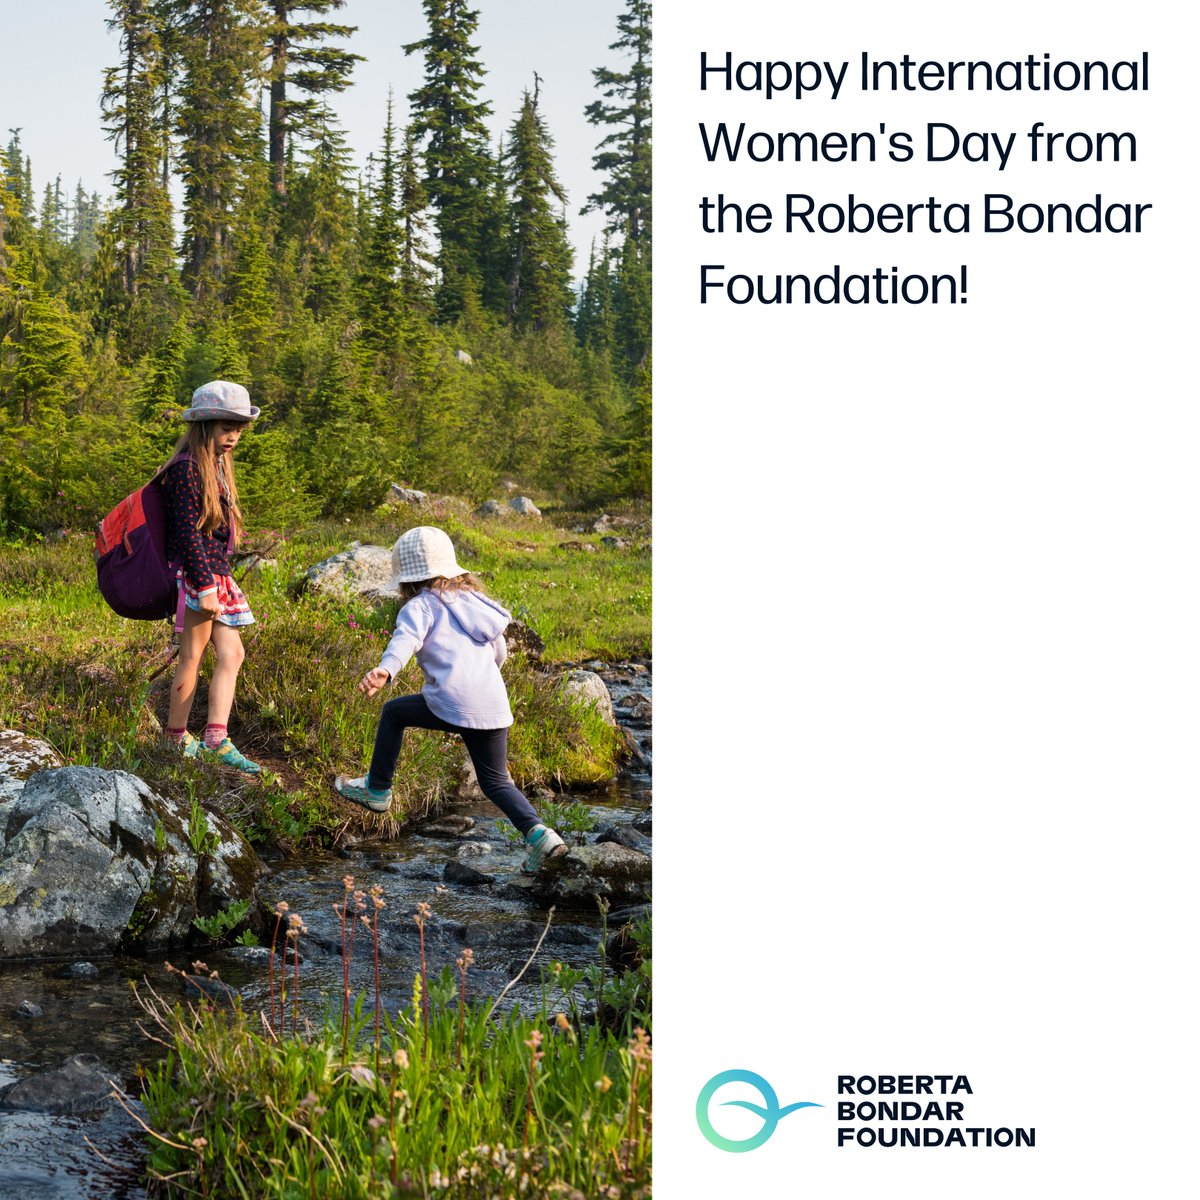 Happy International Women’s Day! Today we’re celebrating Roberta Bondar’s inspiring legacy as an astronaut, scientist, artist, and environmentalist—and the girls across Canada who are becoming the environmental leaders of tomorrow. #IWD2023 #InternationalWomensDay